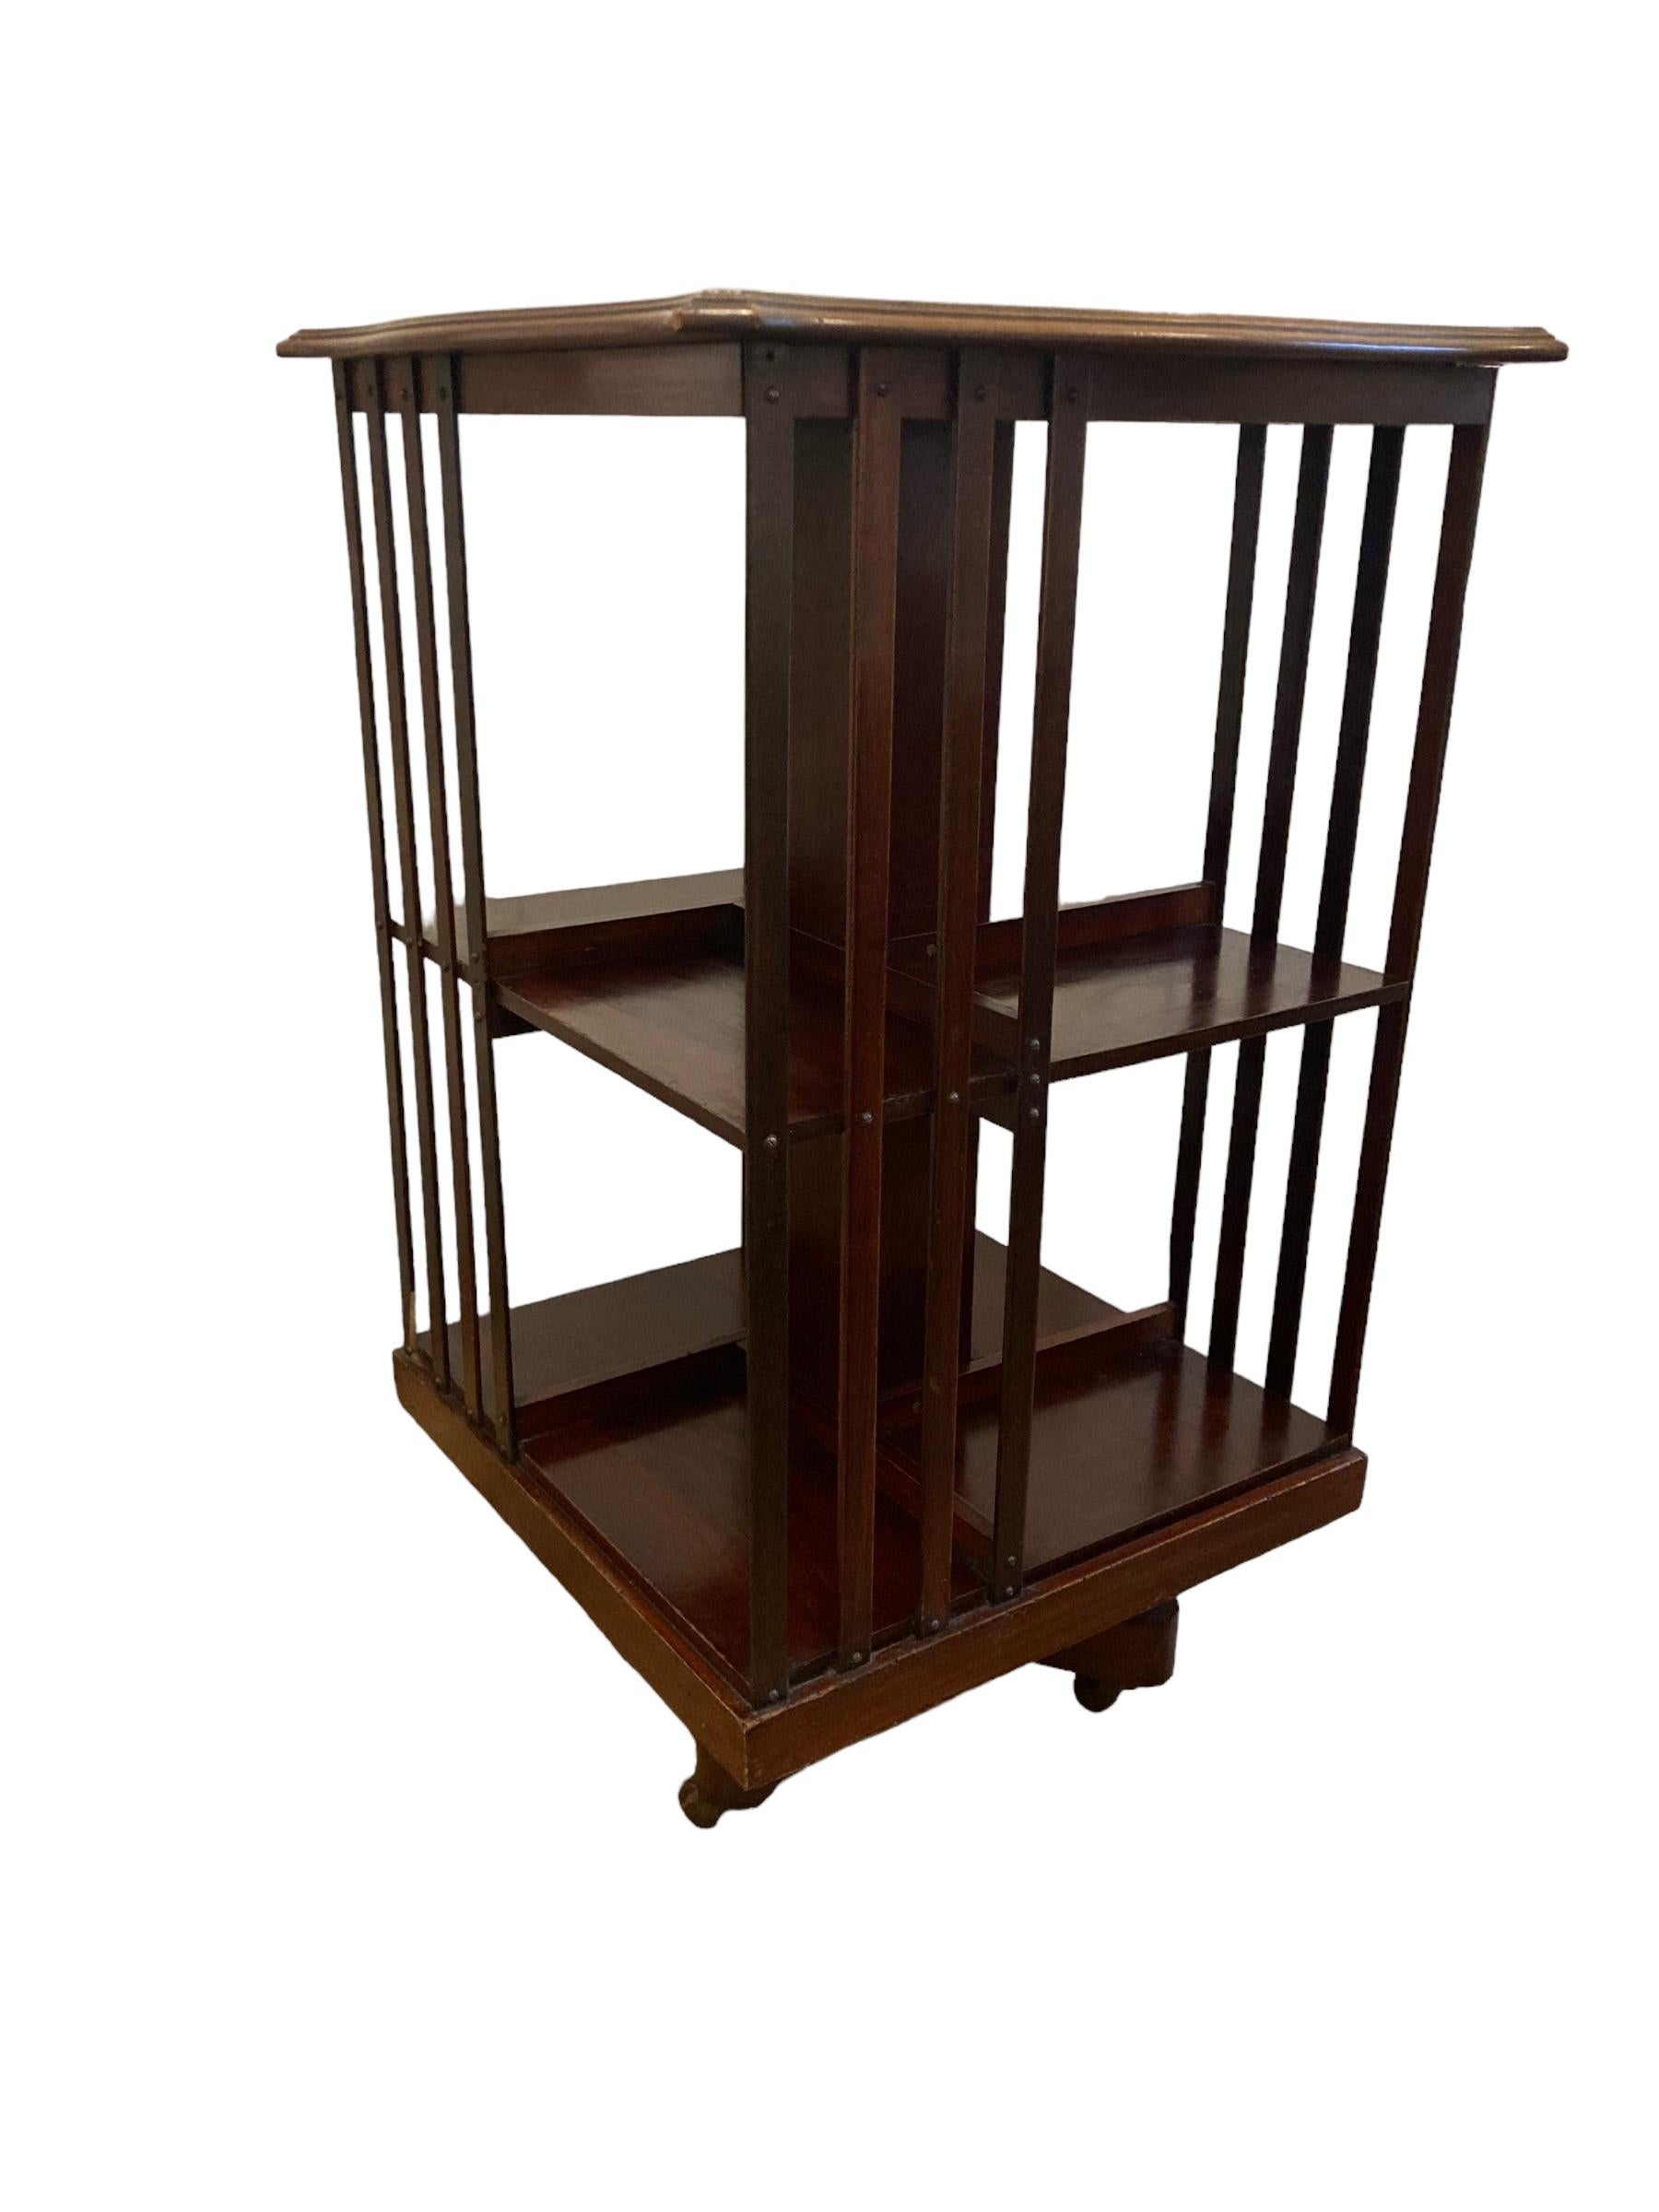 19th Century Edwardian Mahogany revolving Bookcase on casters and slatted supports. For Sale